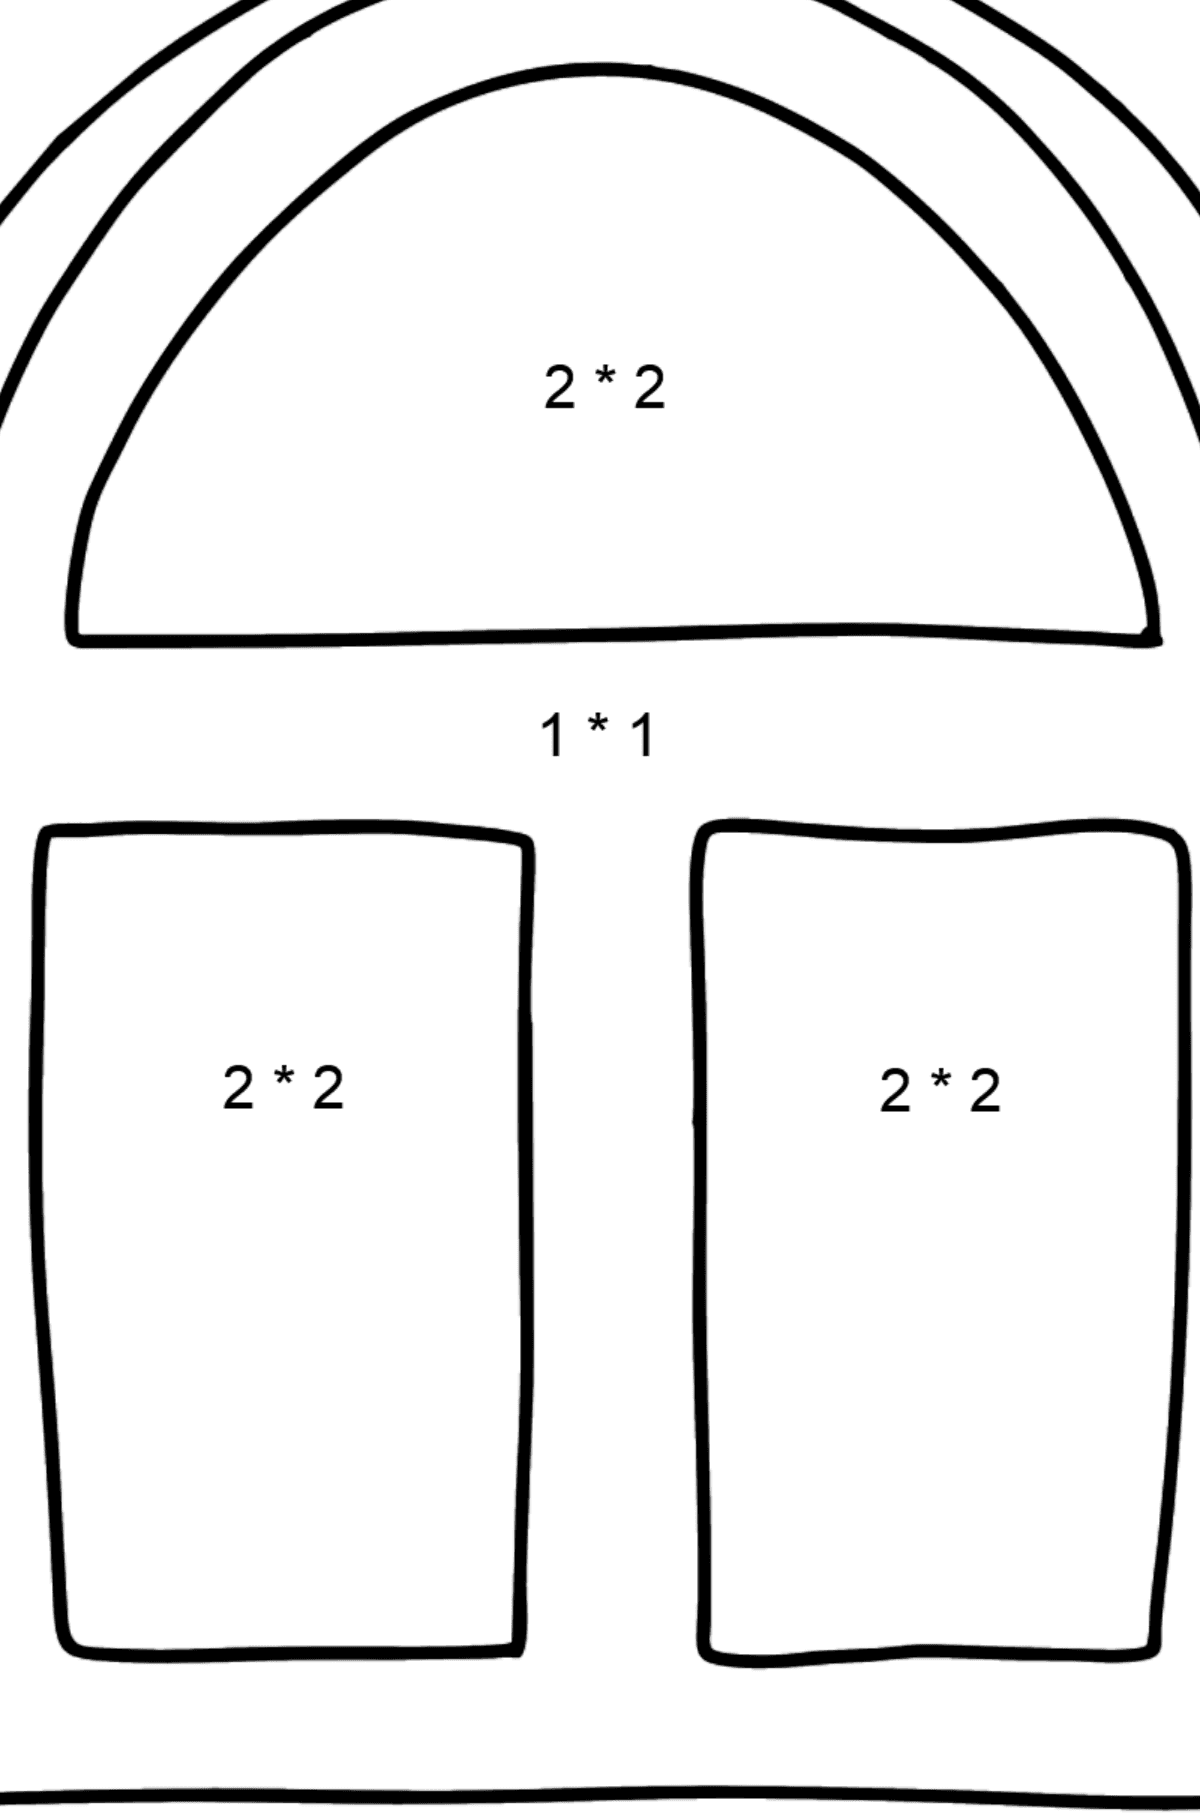 Window coloring page - Math Coloring - Multiplication for Kids